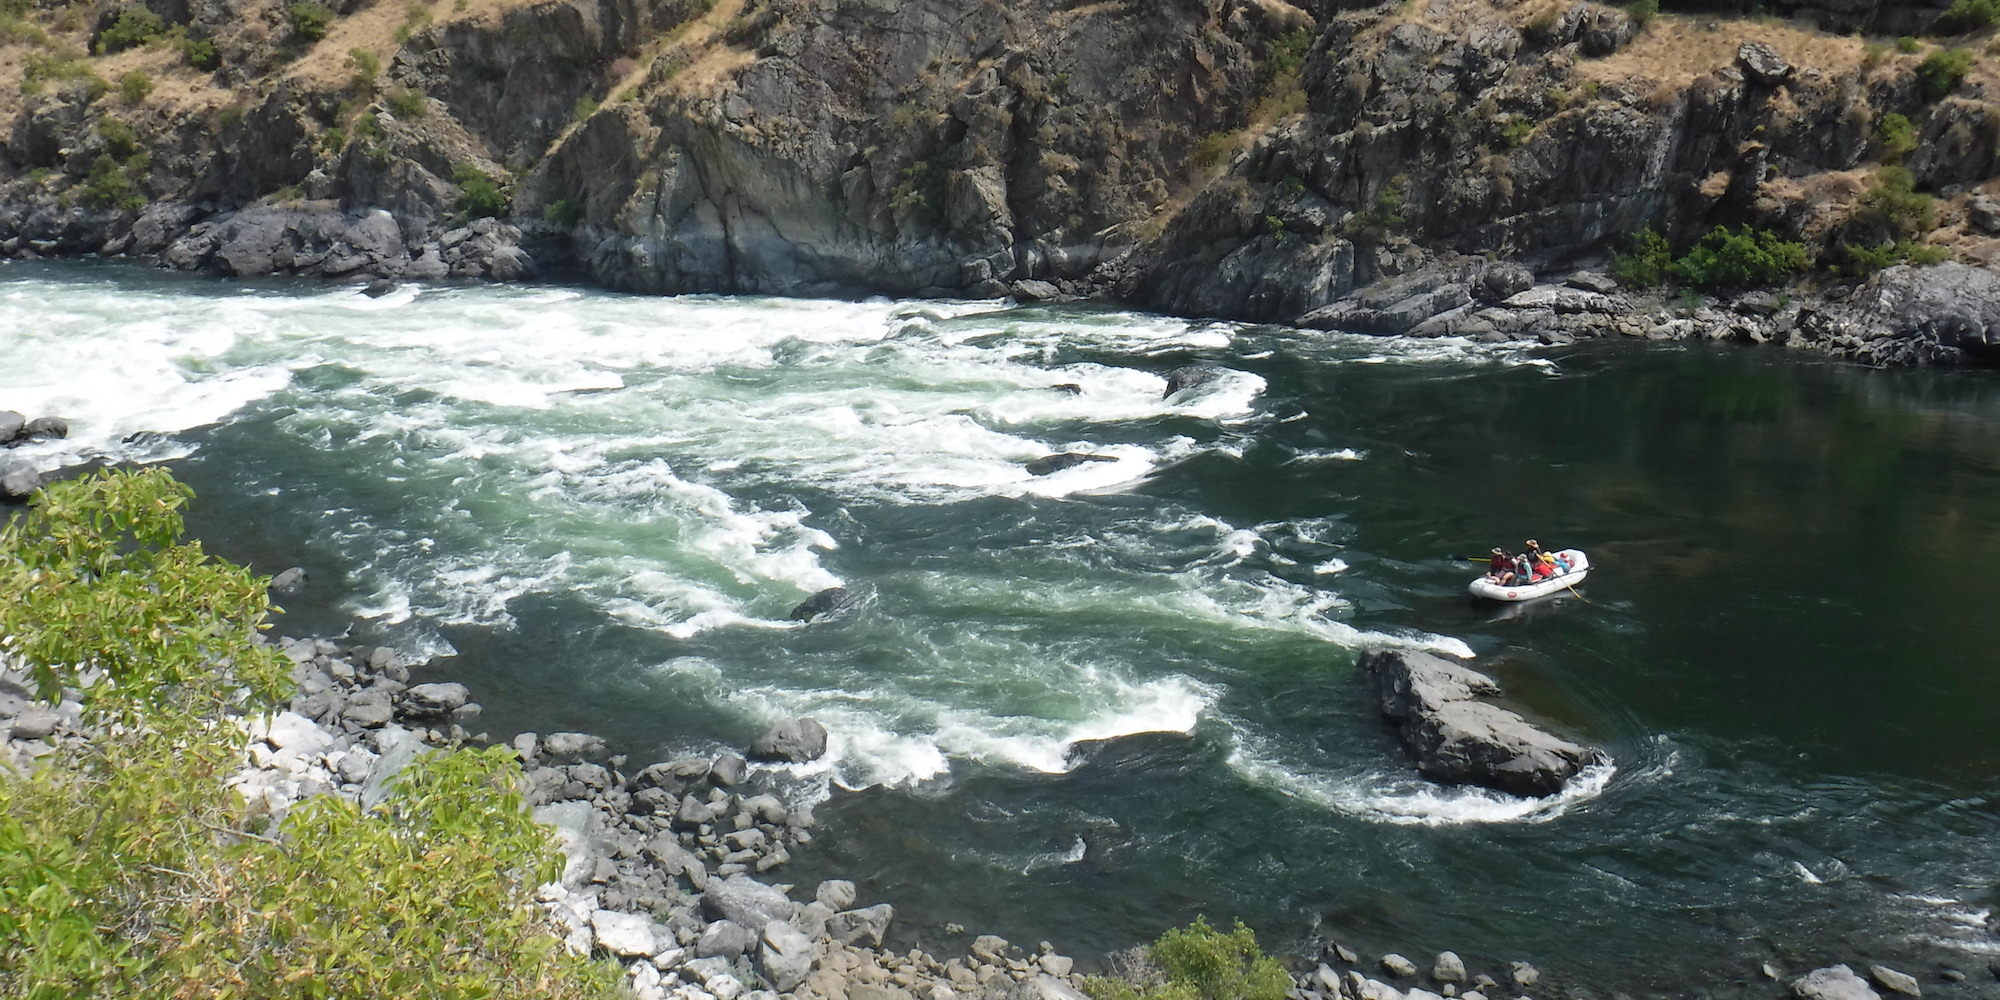 Scout of Wild Sheep Rapid from the Oregon side of Hells Canyon, Snake River